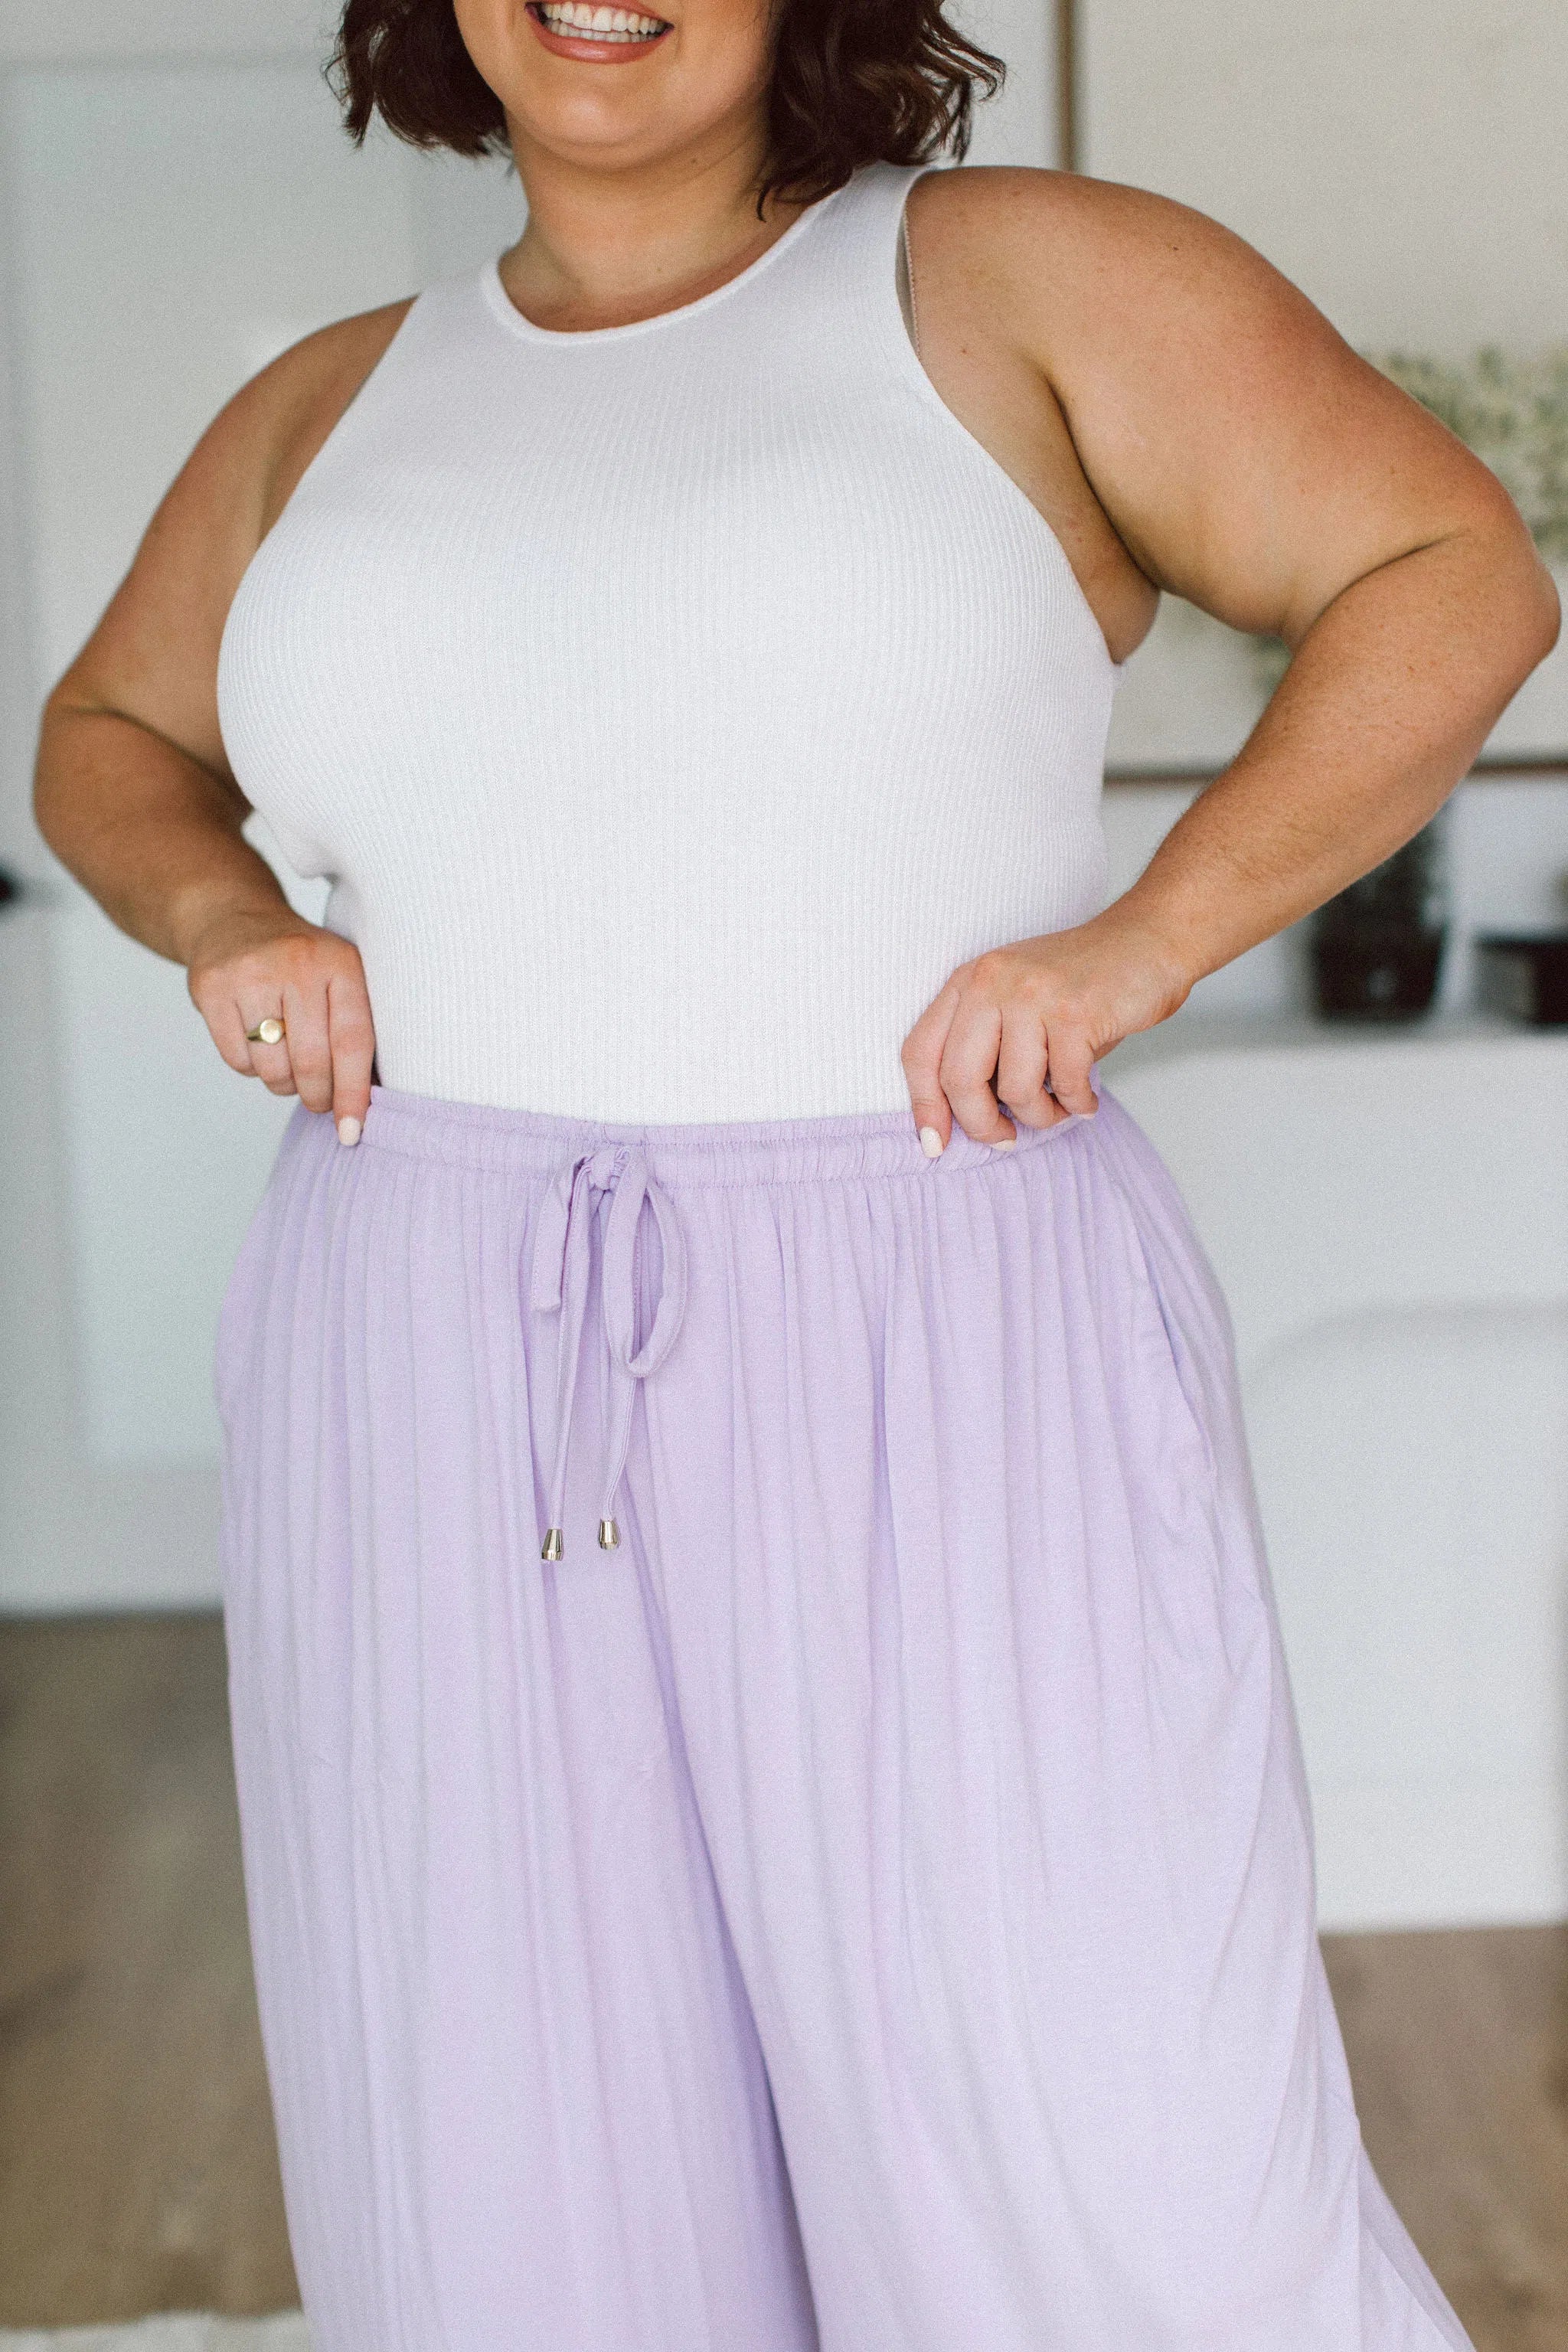 Peach The Label Designer Plus Size Pants - Darcy Pants in Lilac for Curvy Women